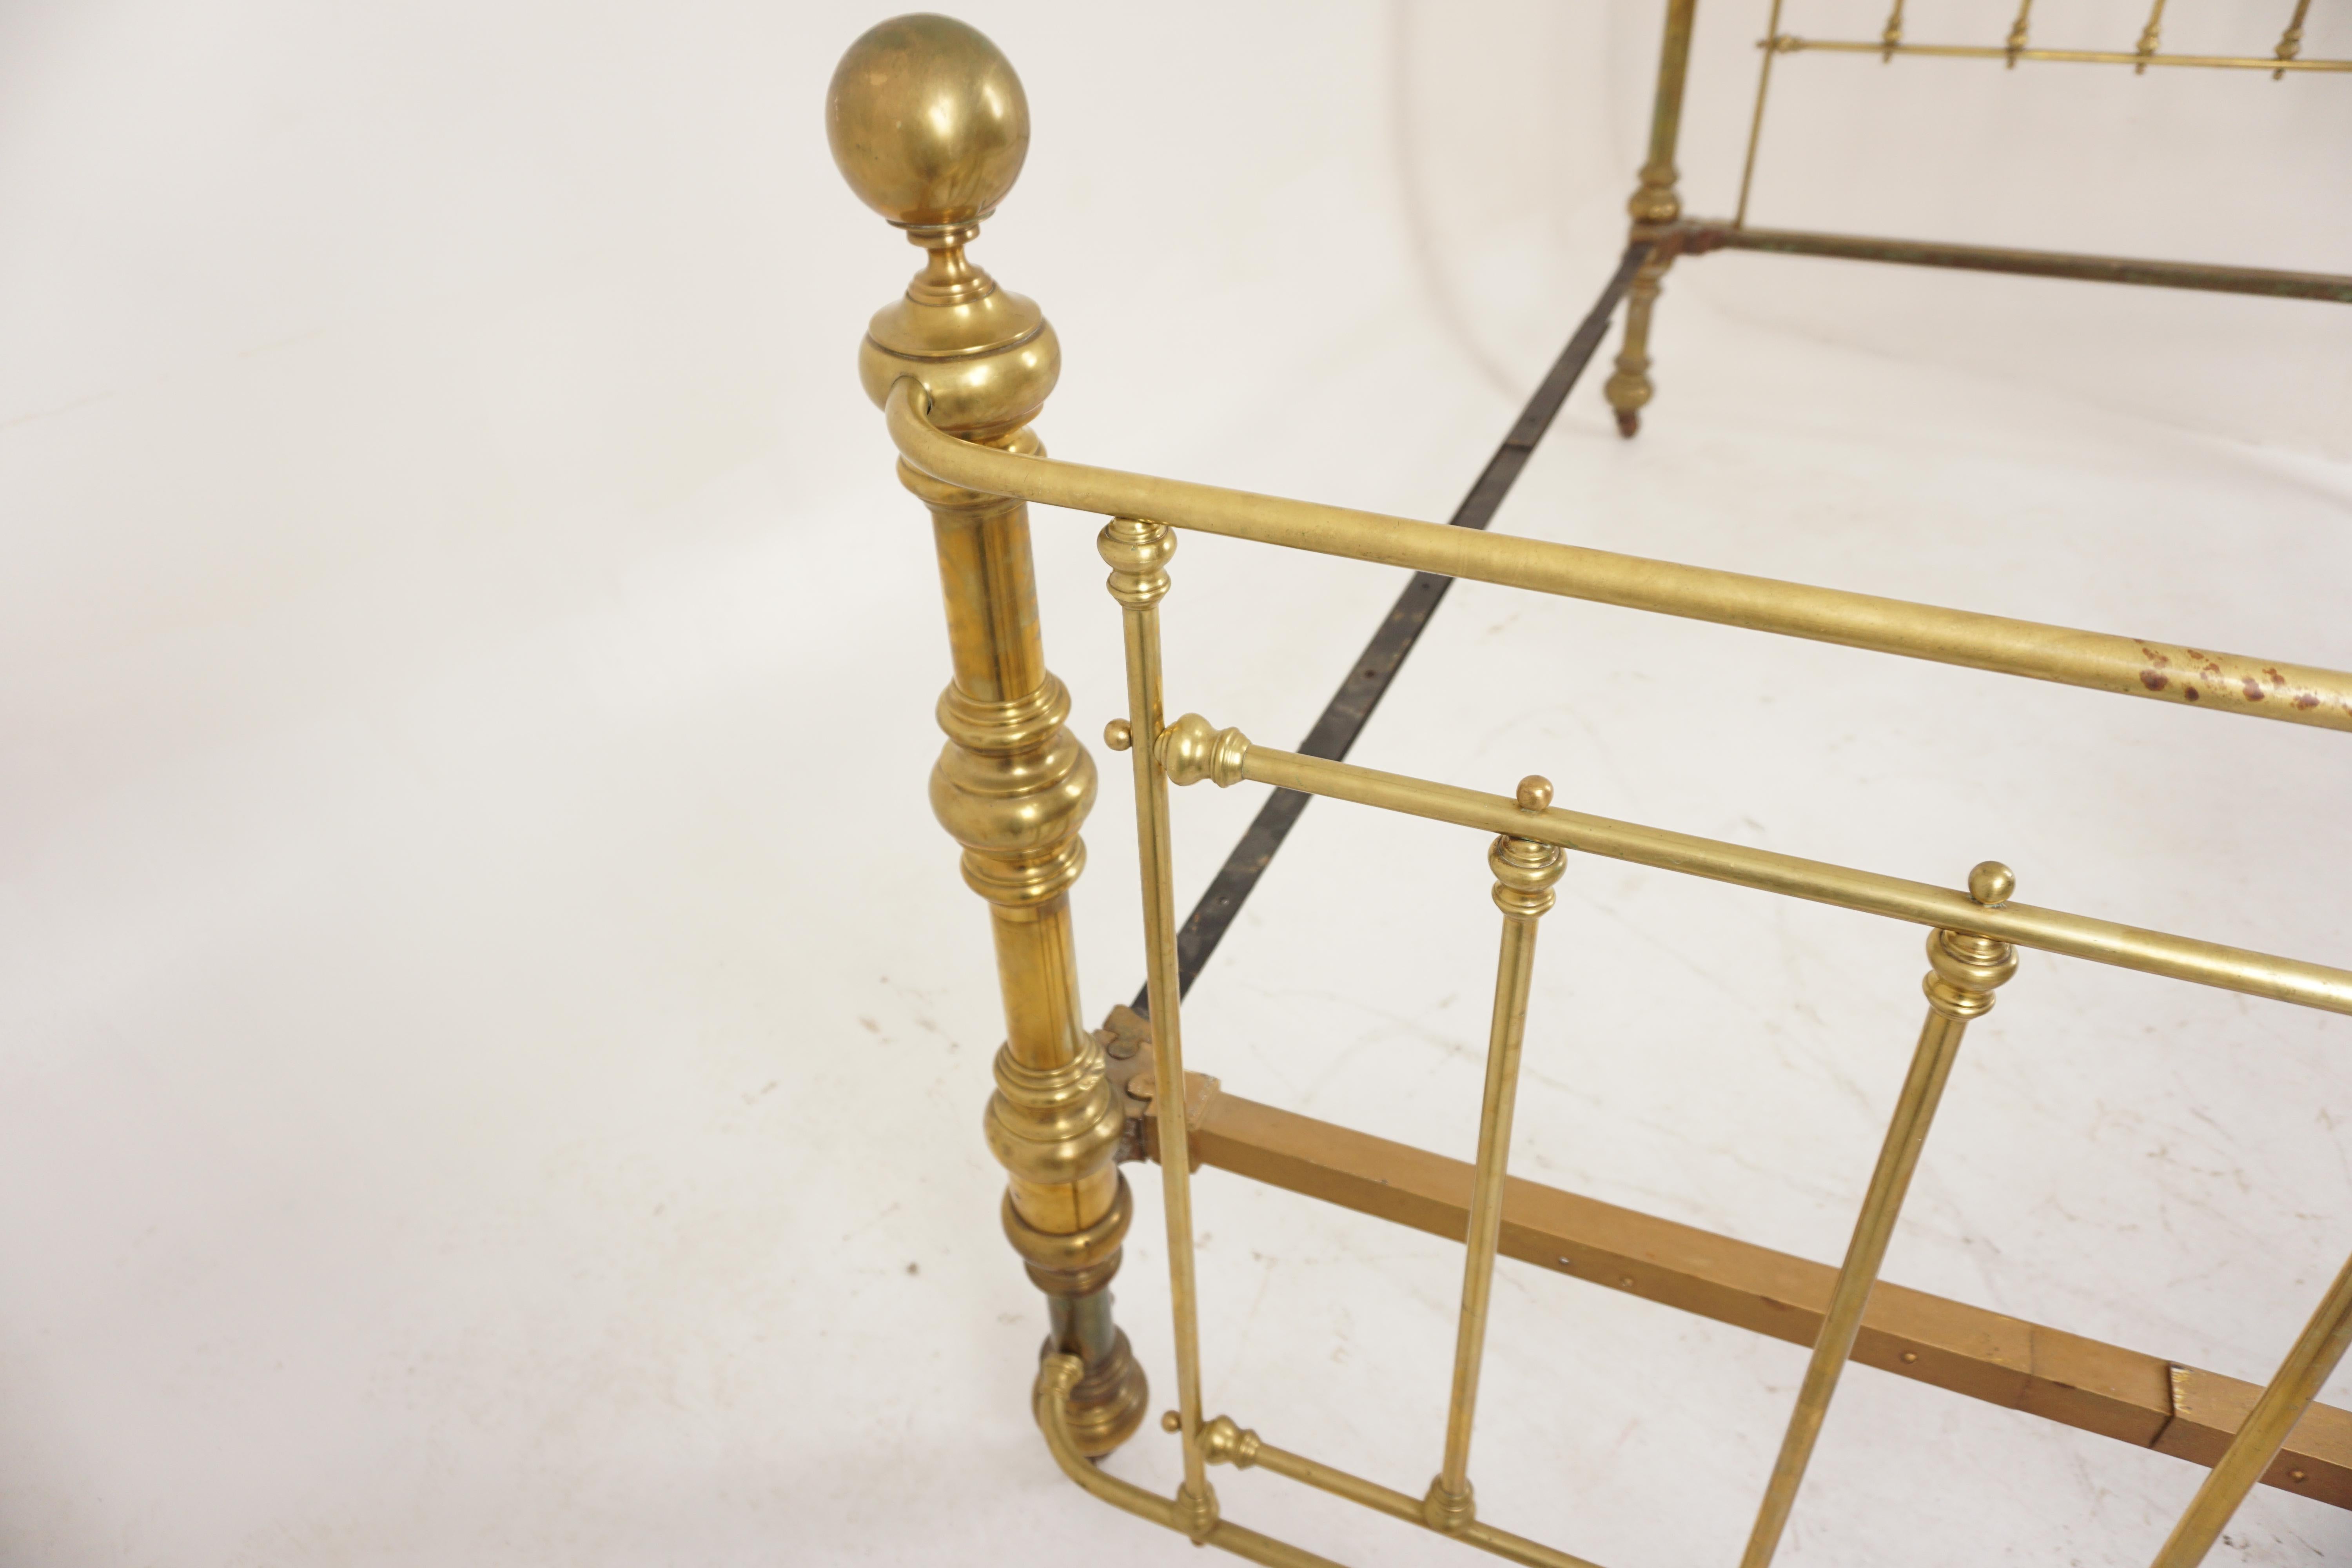 Superb Victorian Brass Double Bed with Rail, Scotland 1880, H933

Scotland 1880
Solid Brass
Original Finish
Both ends of this attractive bed with top rails having big brass bed knobs at each end
With vertical and horizontal brass rails
The